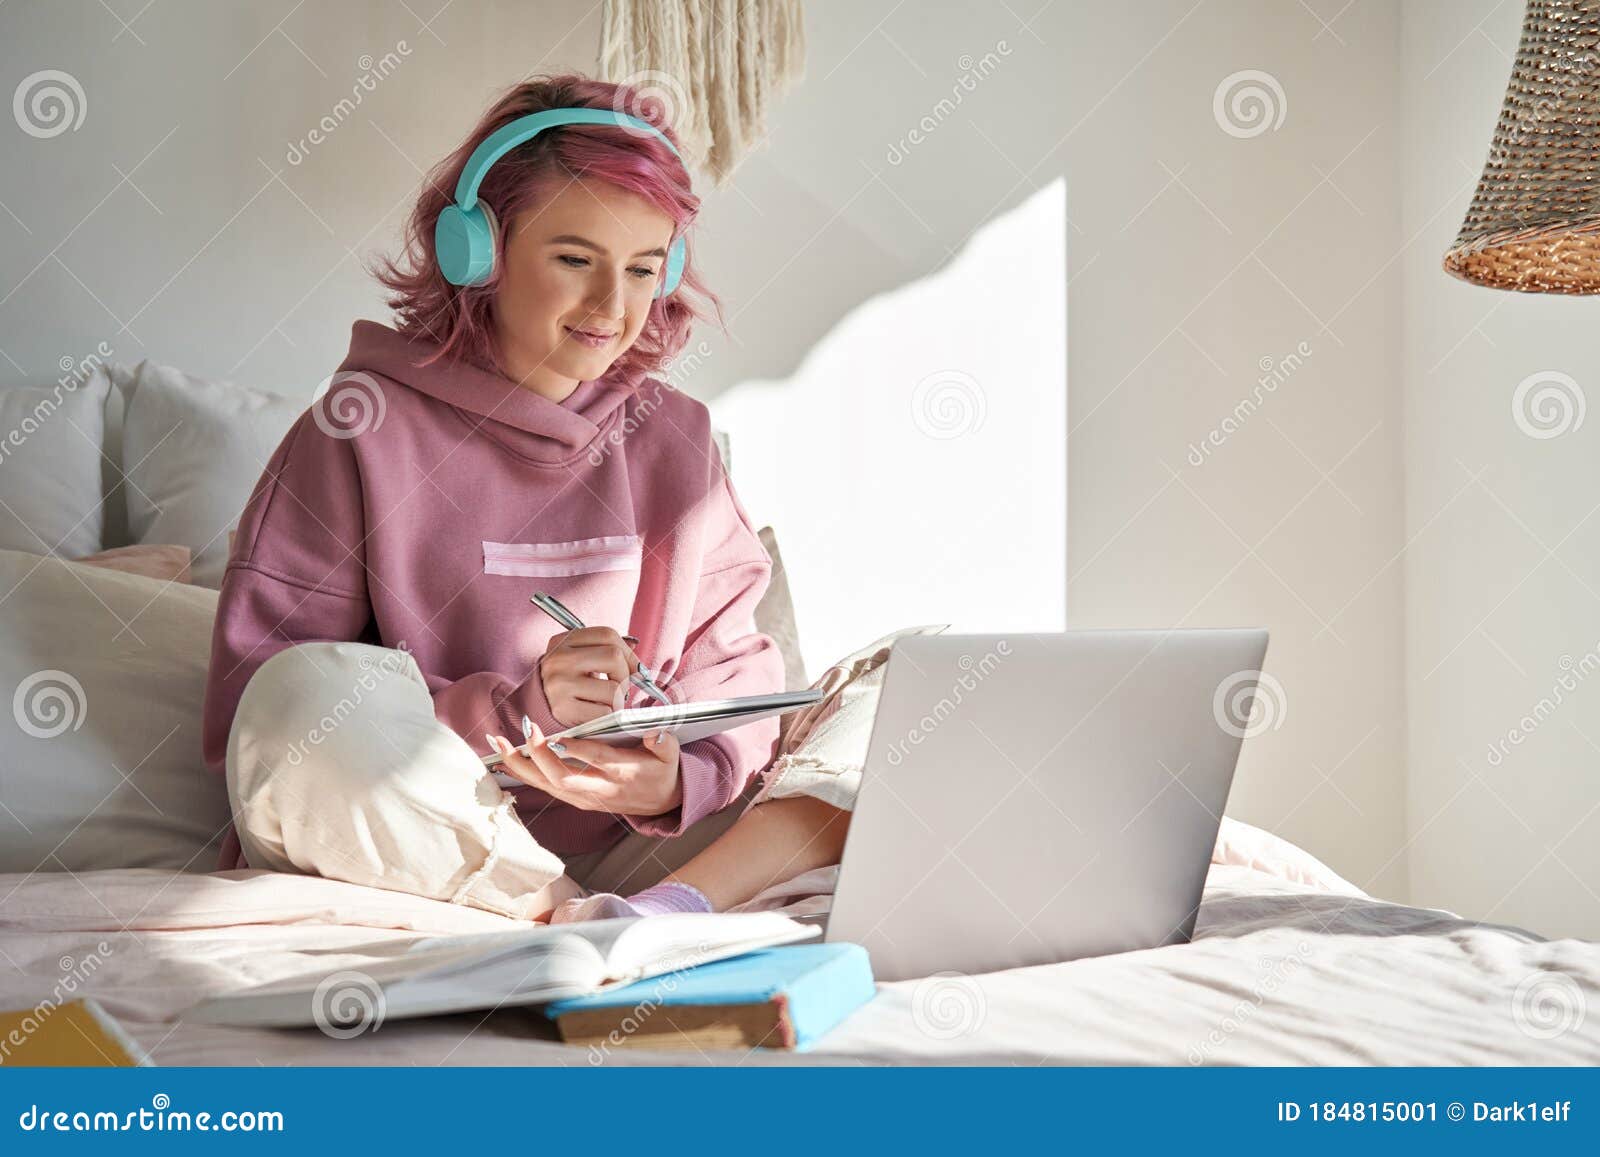 hipster teen girl student with pink hair watch online webinar learning in bed.